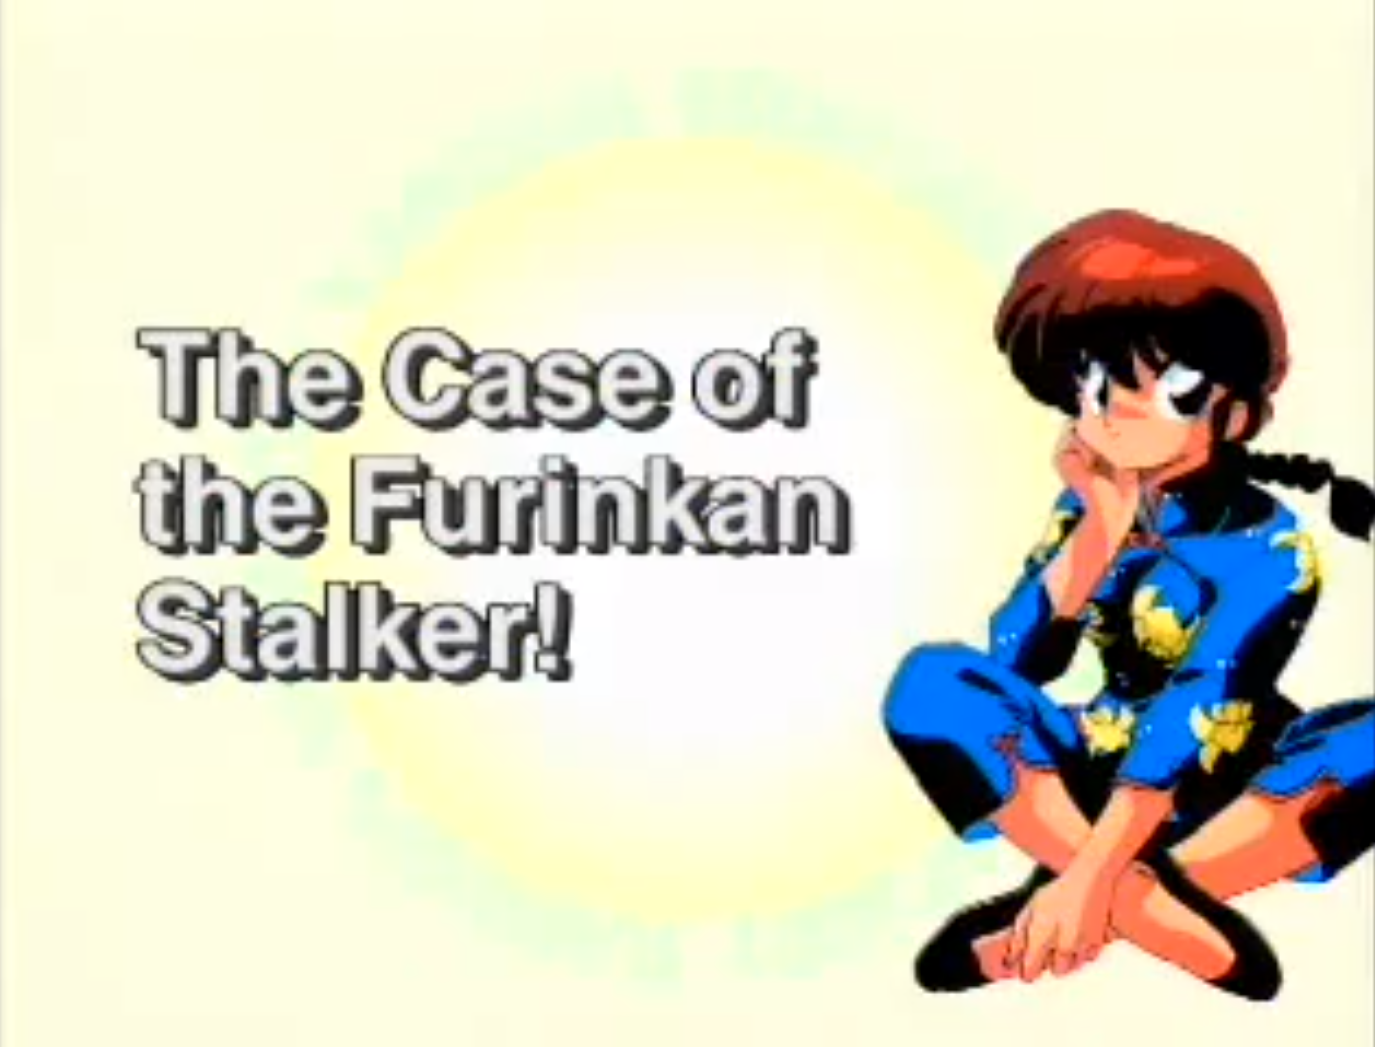 The Case of the Furinkan Stalker! | Ranma Wiki | Fandom powered by ...